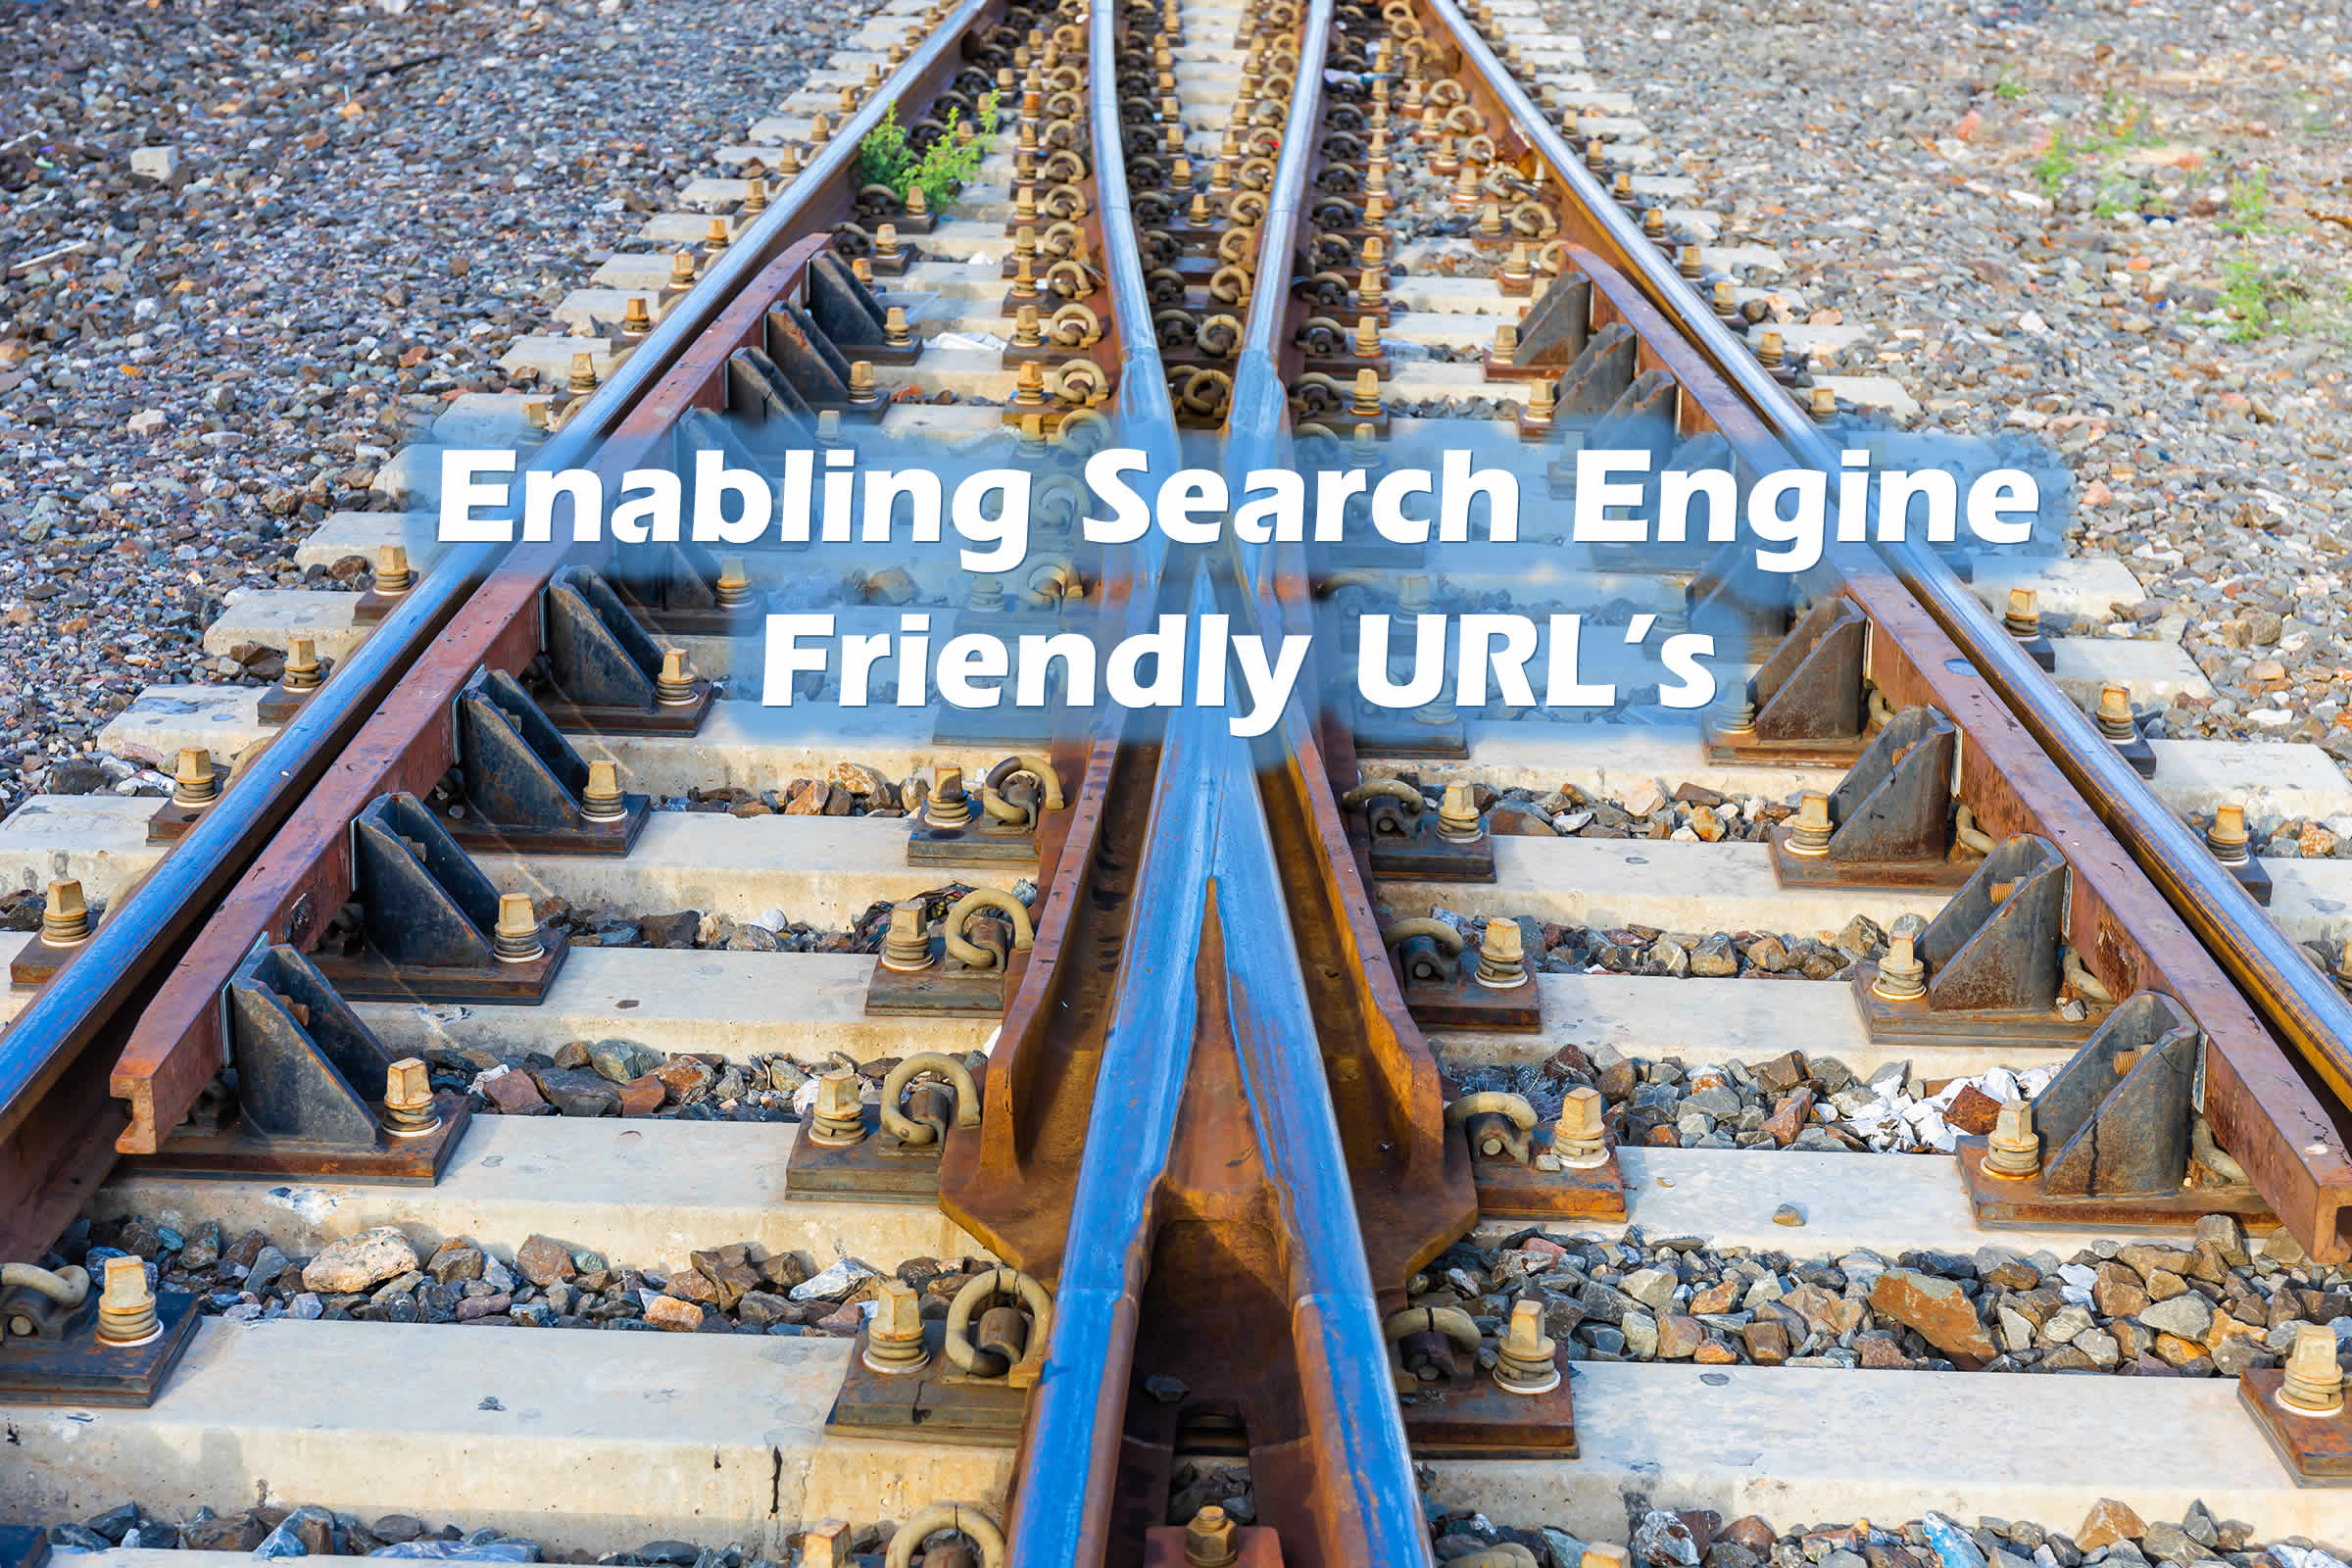 Enabling Search Engine Friendly Links with Url Re-write in Galaxie Blog